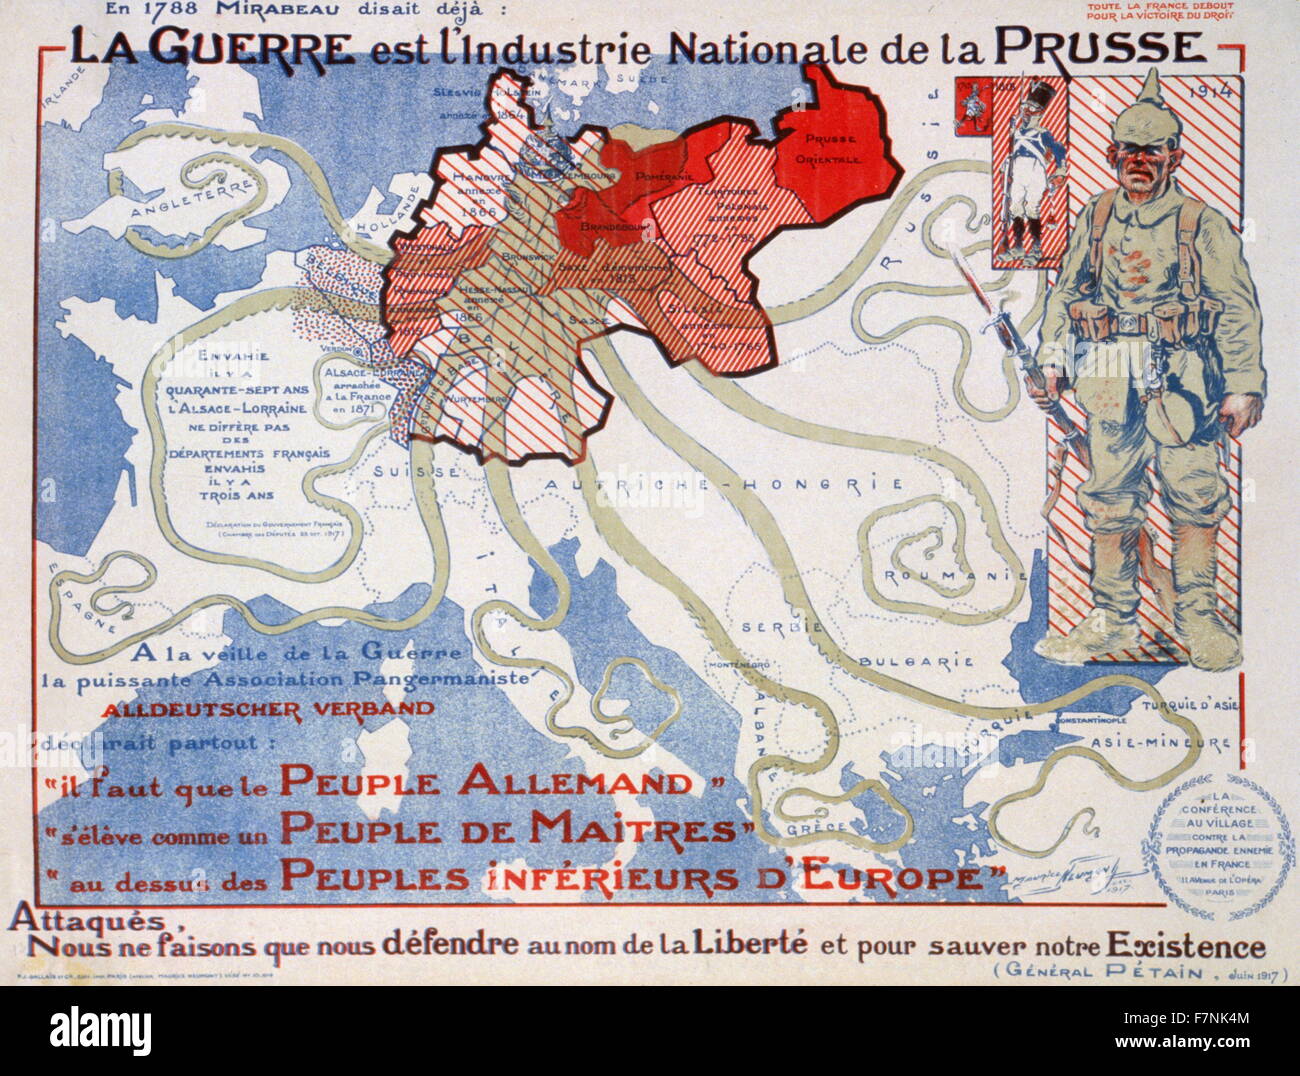 World war One French propaganda poster. Maurice Neumont, 1868-1930.Prussia depicted as an octopus whose tentacles are reaching into Europe. 'War is the national industry of Prussia. 'Attacked, we are fighting back in the name of liberty.' General Philippe Petain (1856-1951), June 1917. Stock Photo